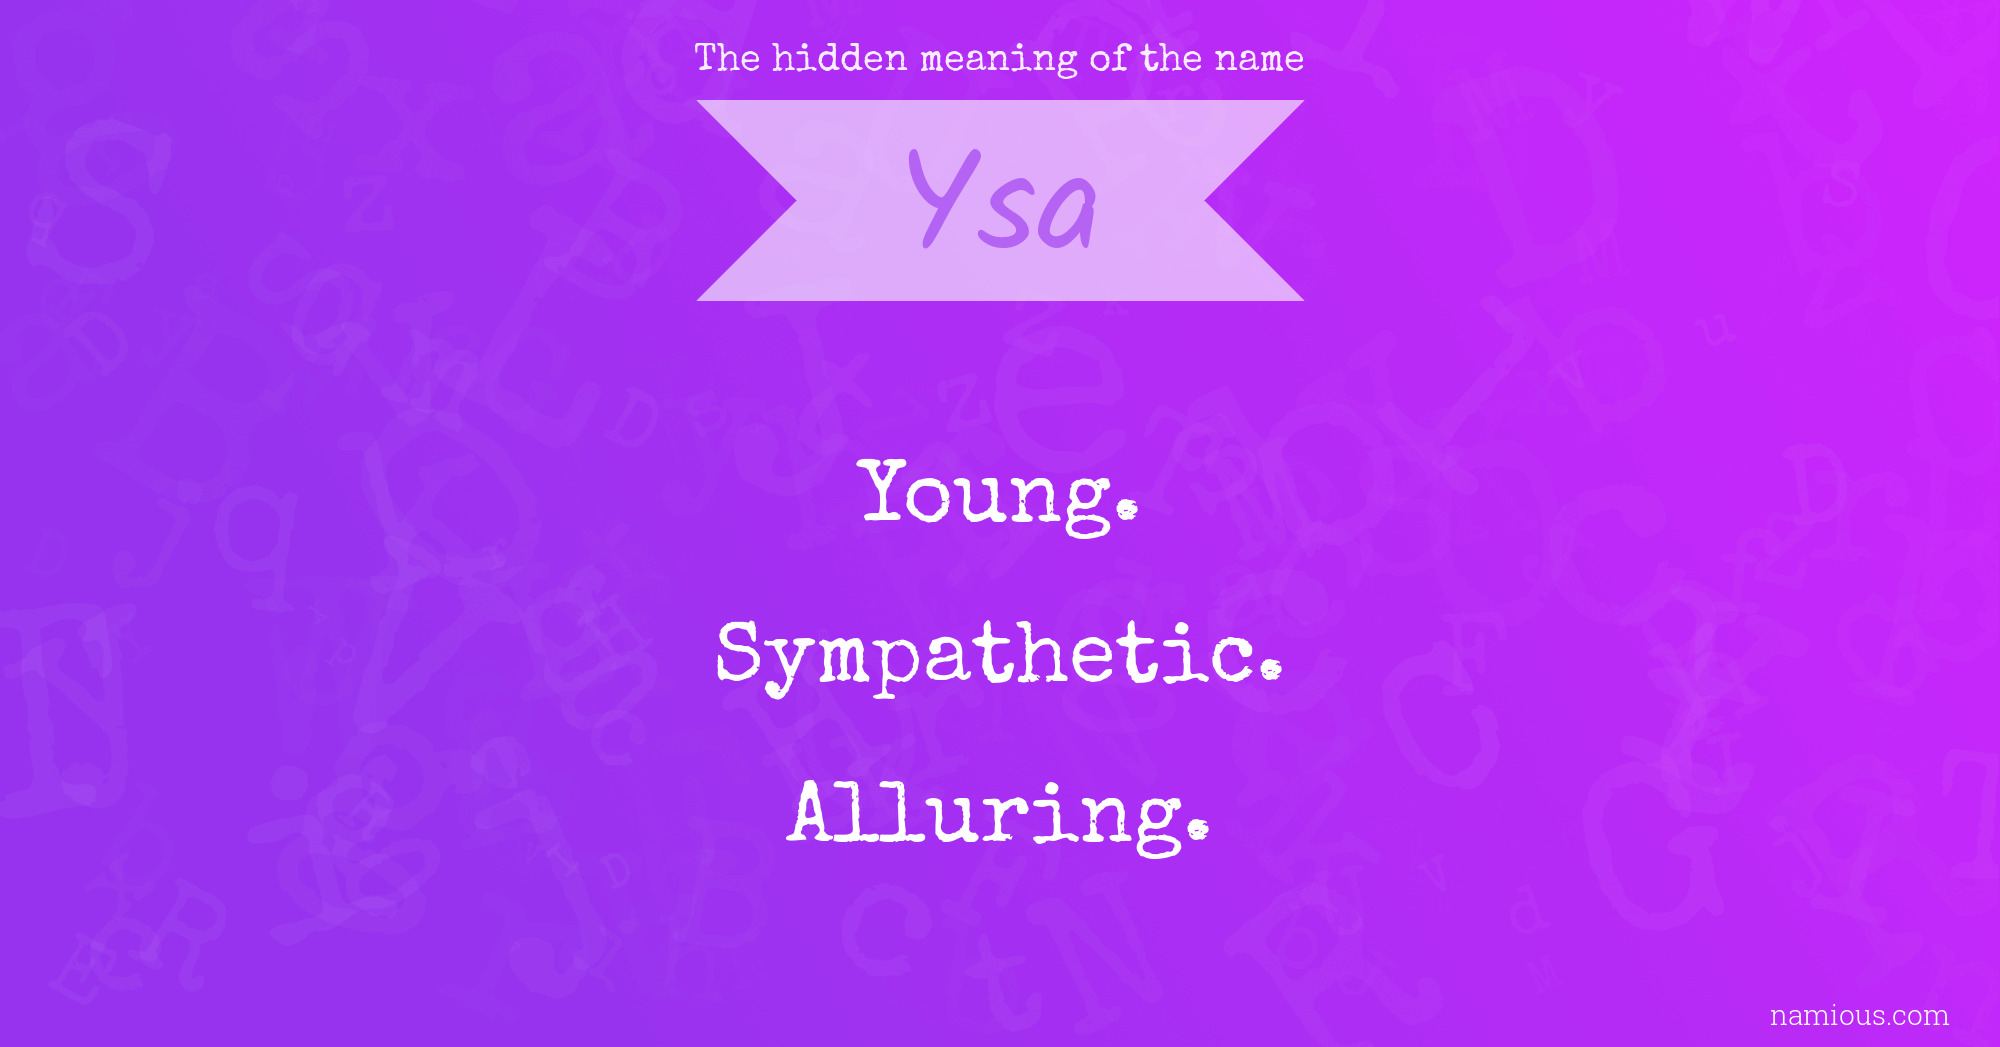 The hidden meaning of the name Ysa